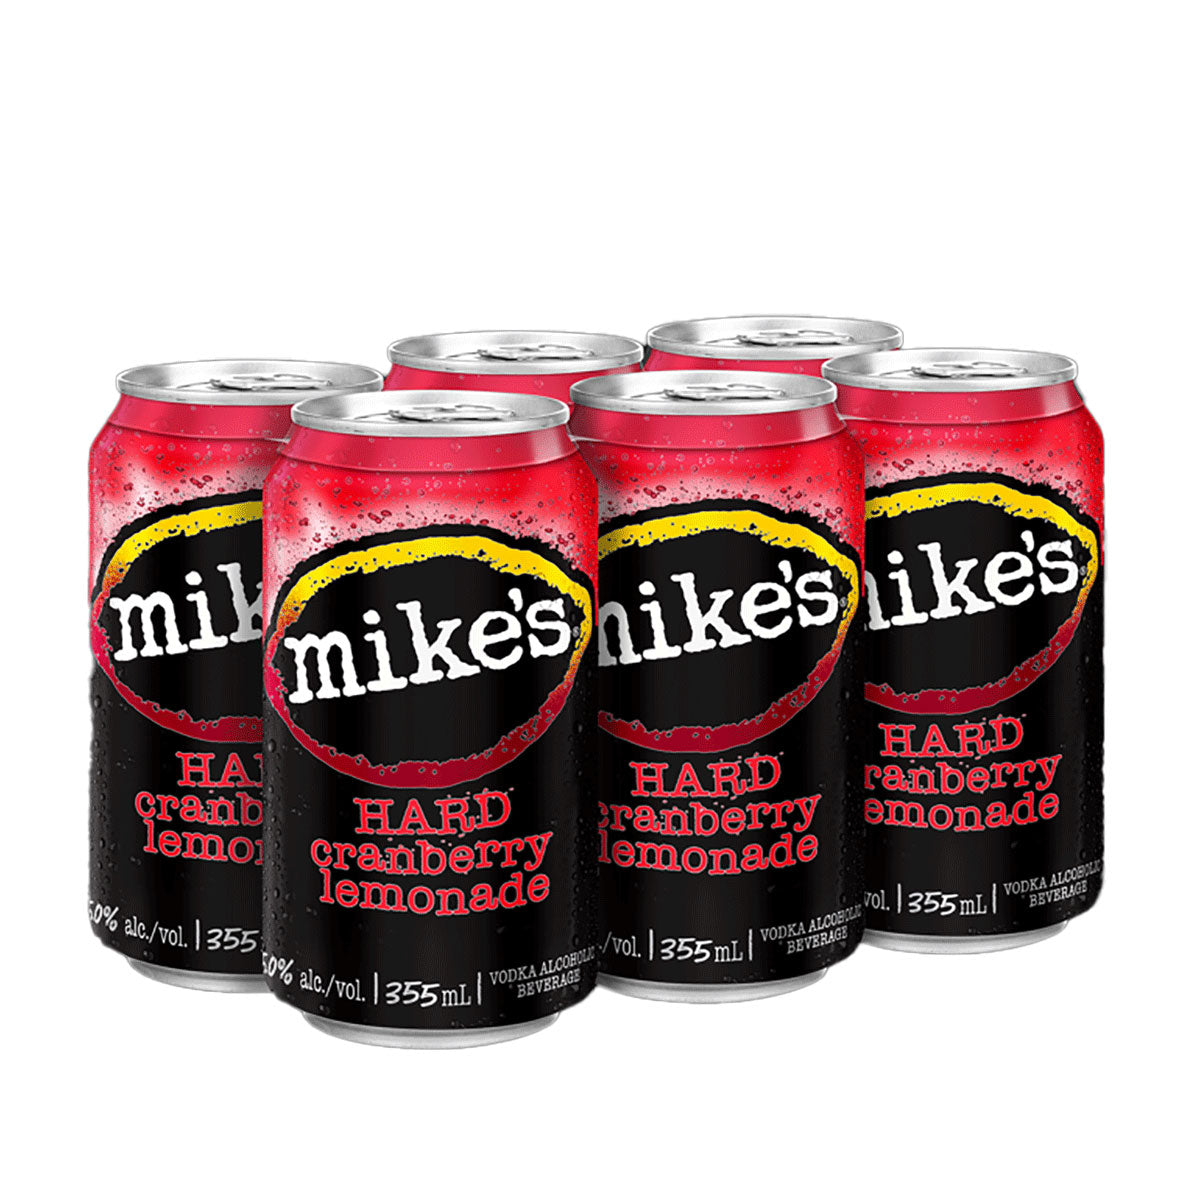 TAG Liquor Stores BC - Mike's Hard Cranberry Lemonade 6 Pack Cans